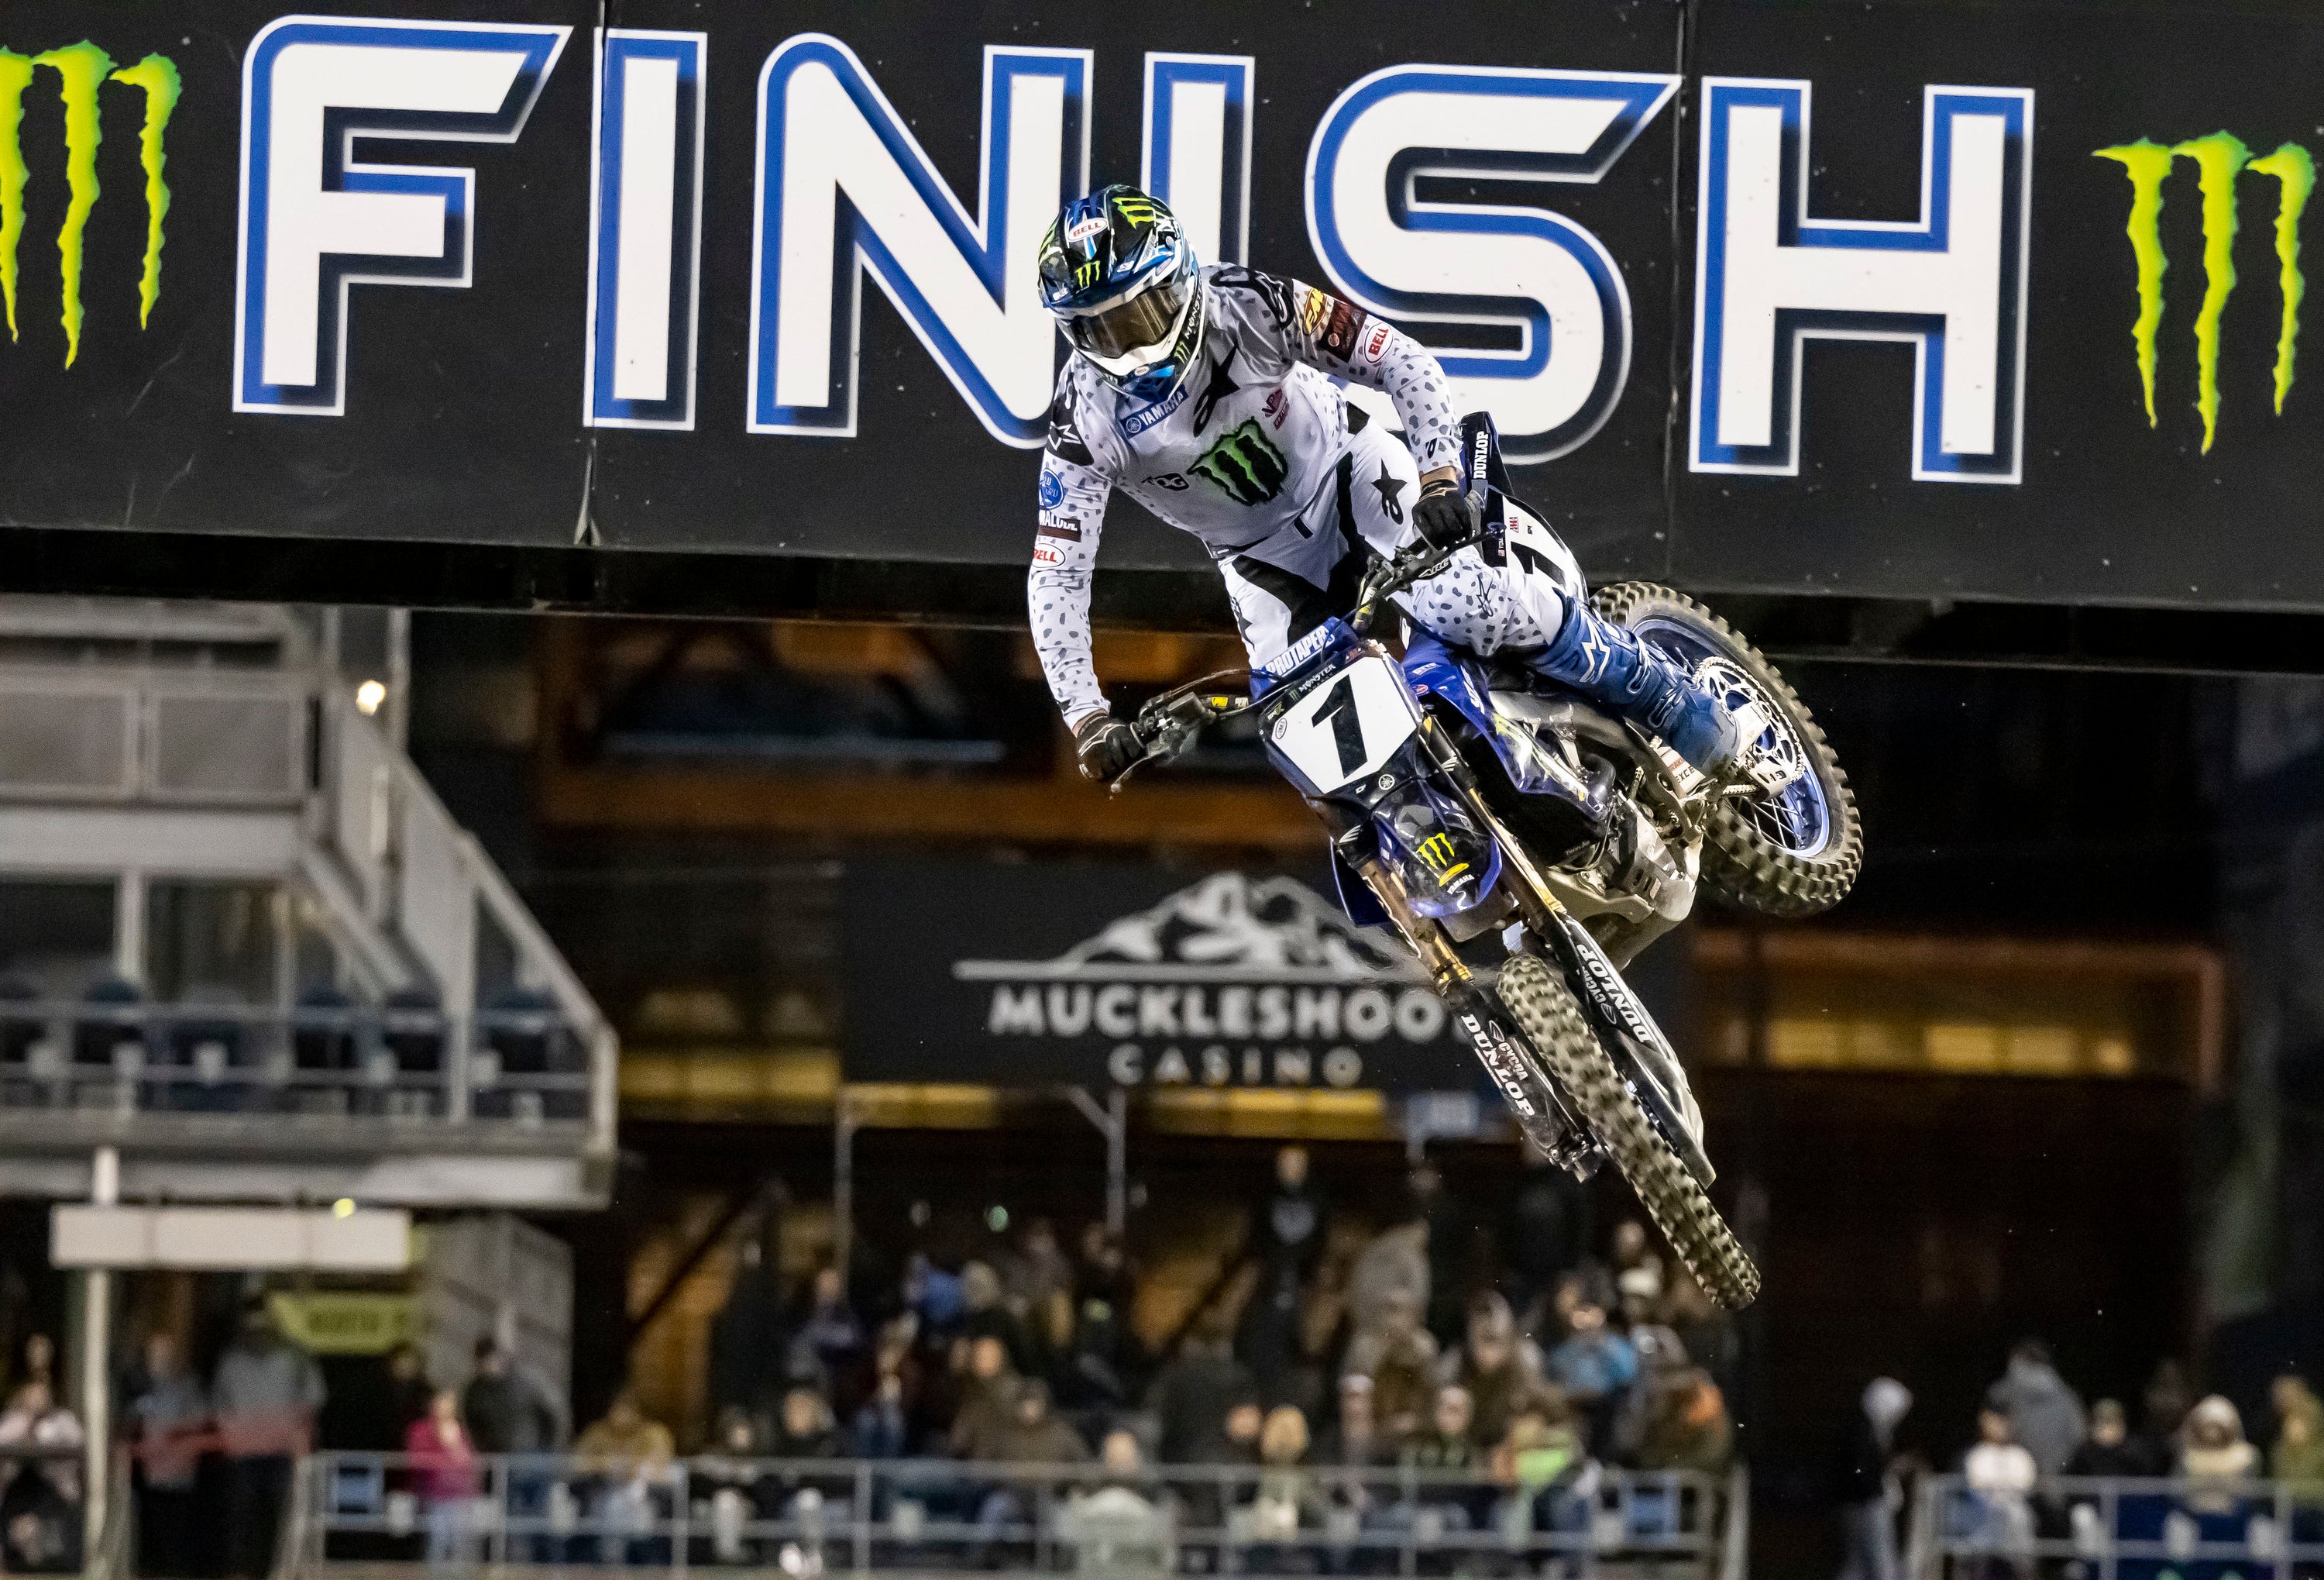 ALPINESTARS TOP FIVE LOCK-OUT AS HIGH-FLYING ELI TOMAC TASTES 450SX SUCCESS IN SEATTLE TO MAKE IT 50 CLASS WINS